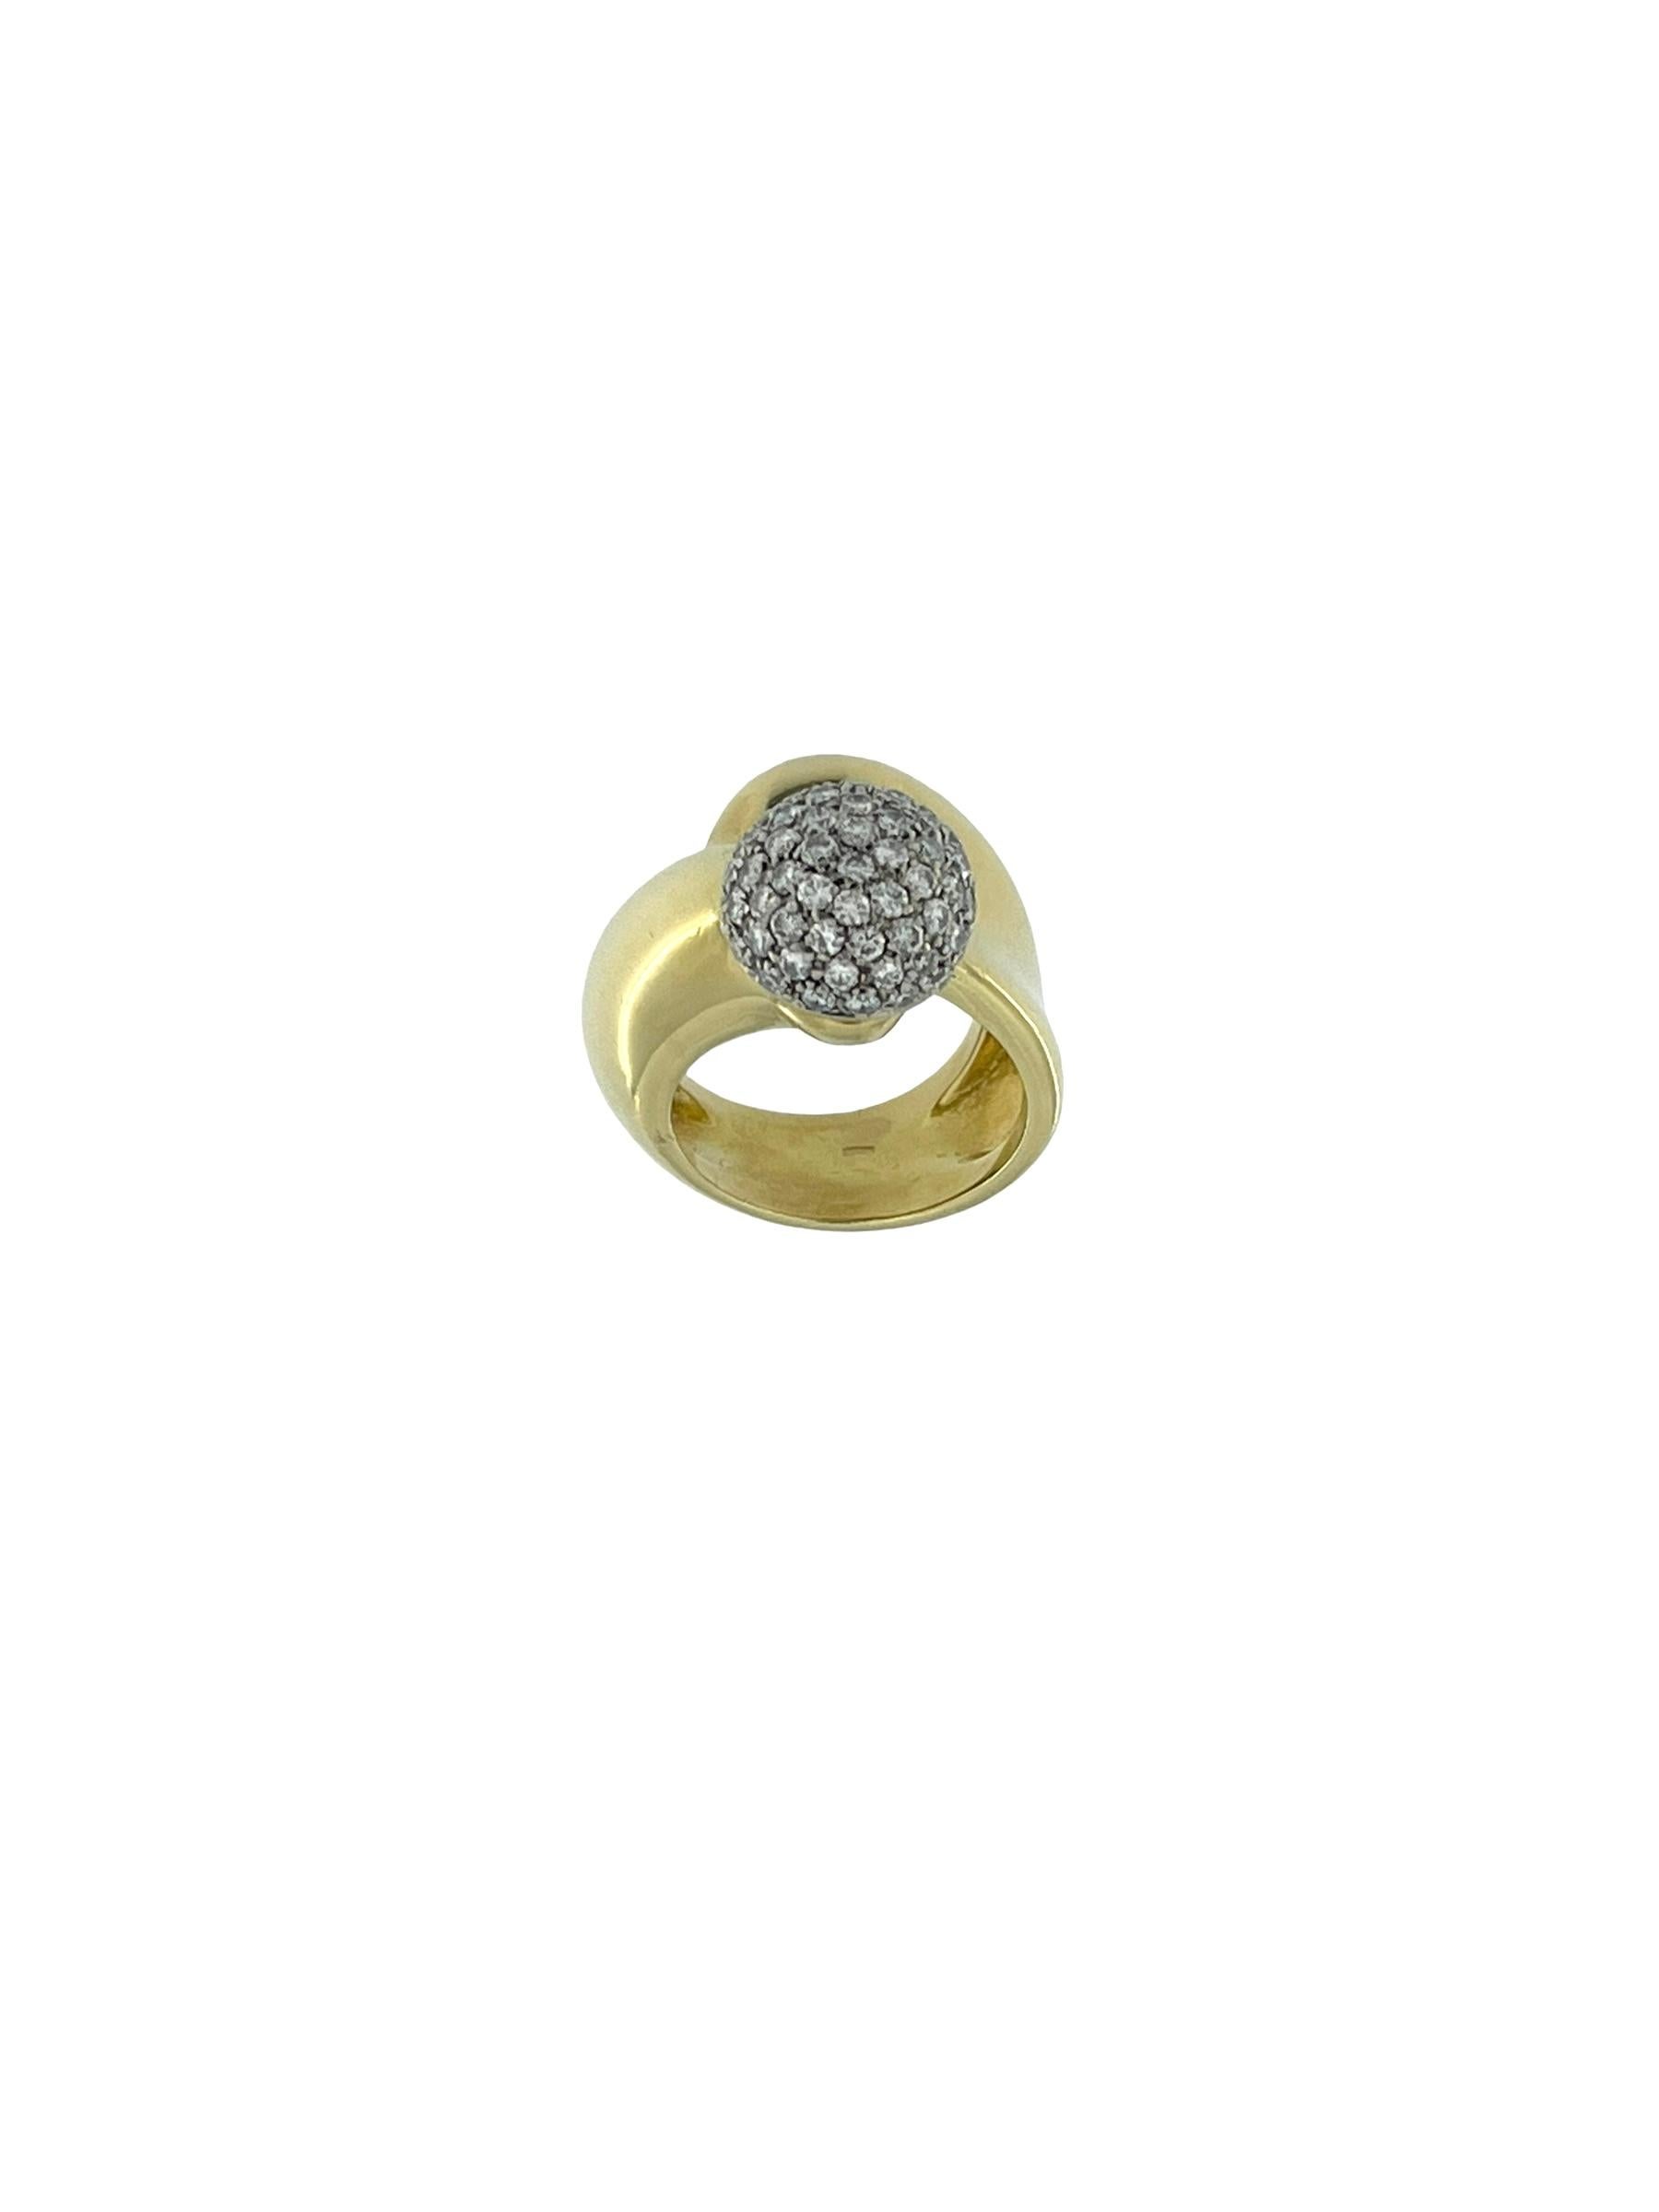 Brilliant Cut HRD Certified Retro Style Gold Ring with Diamonds For Sale